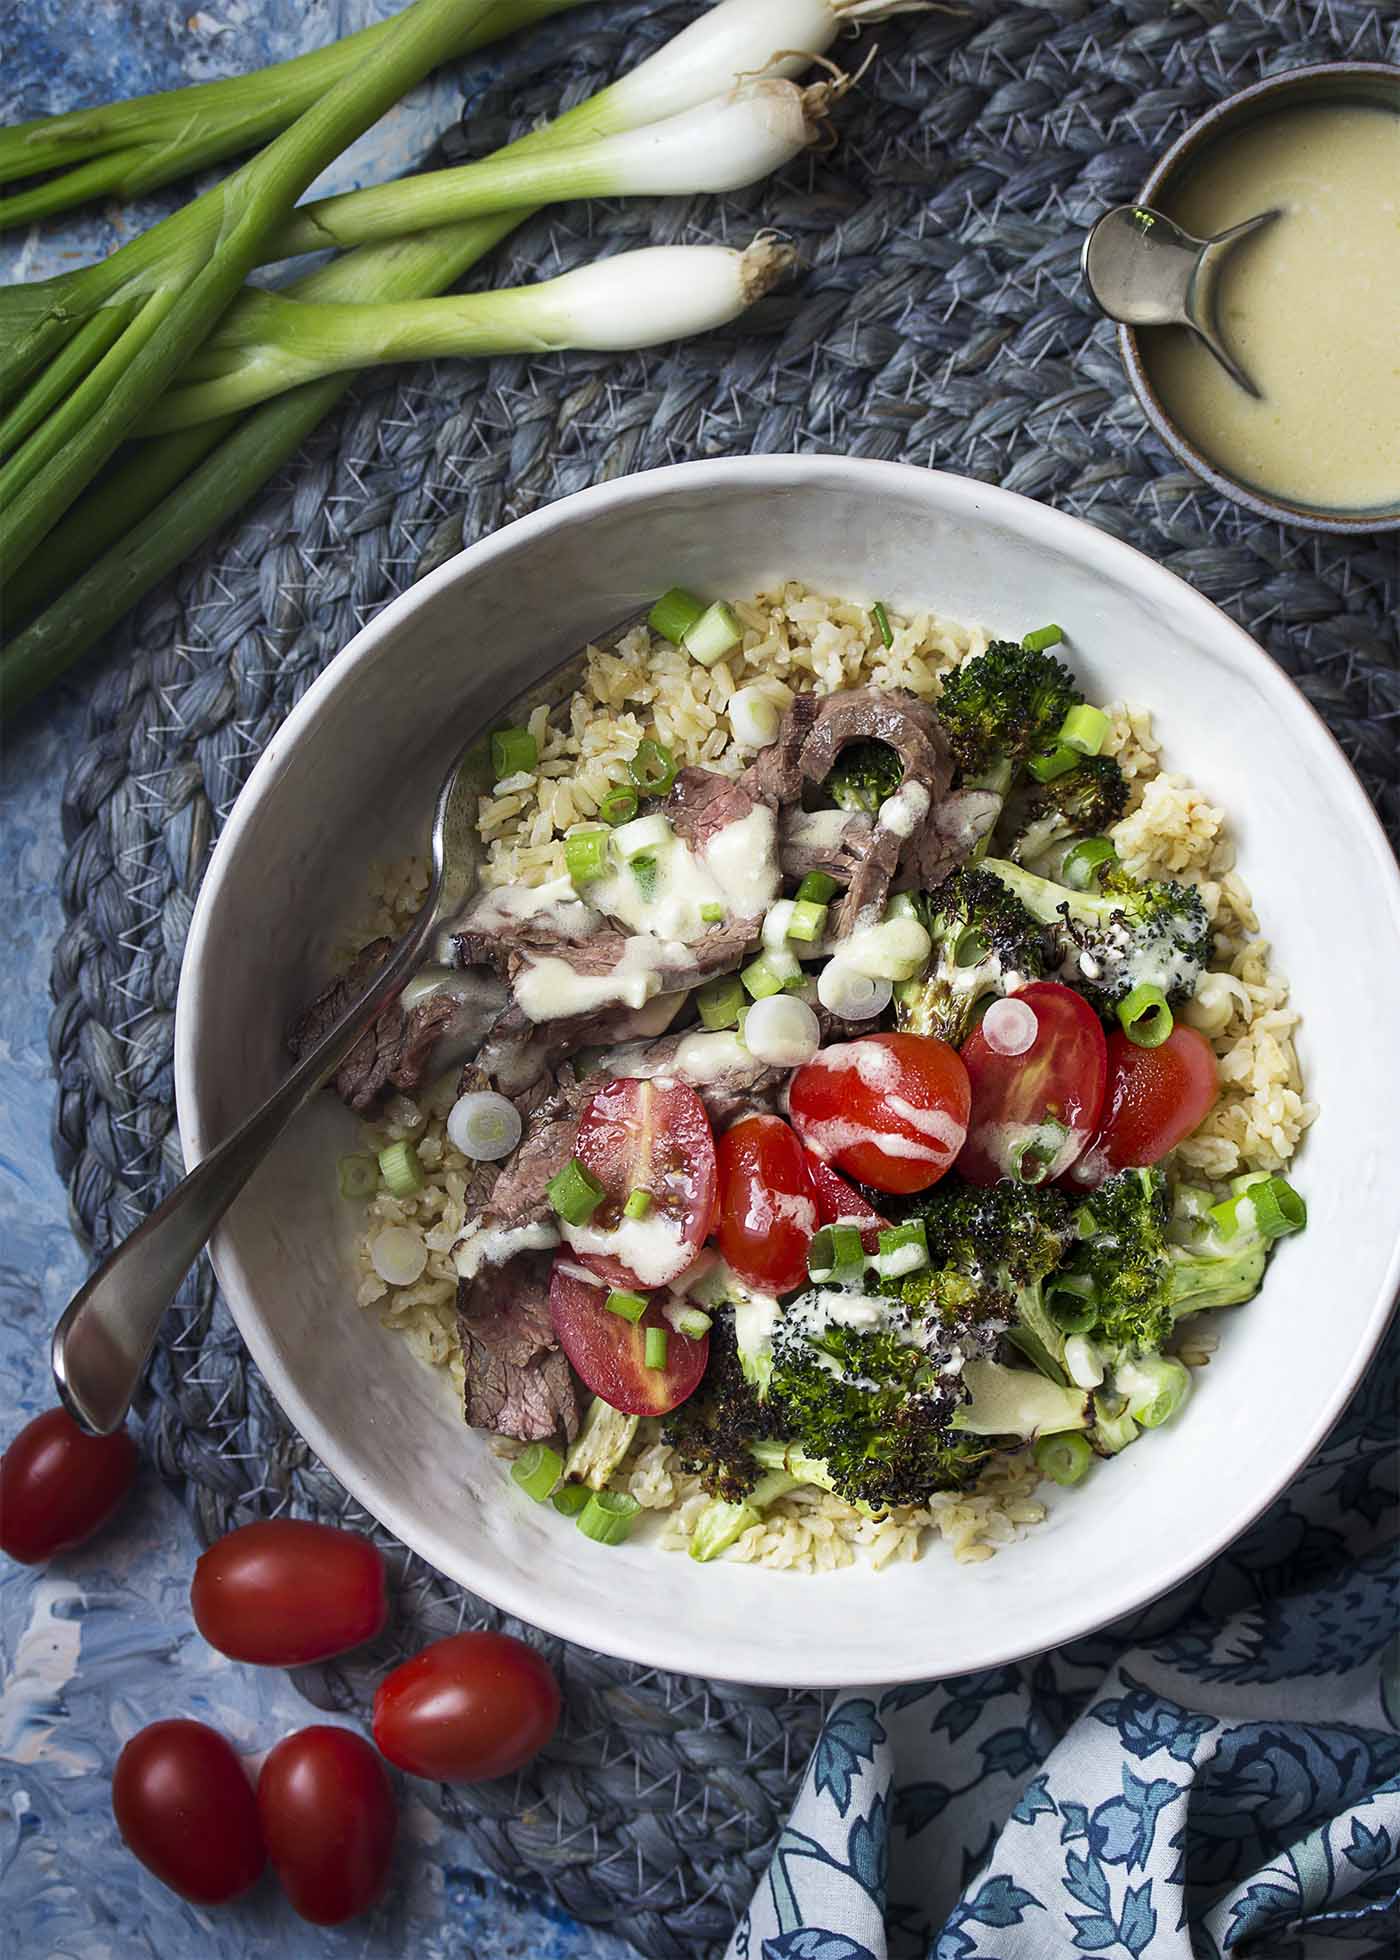 Top view of a grain bowl with brown rice, steak, and broccoli all topped by blue cheese.